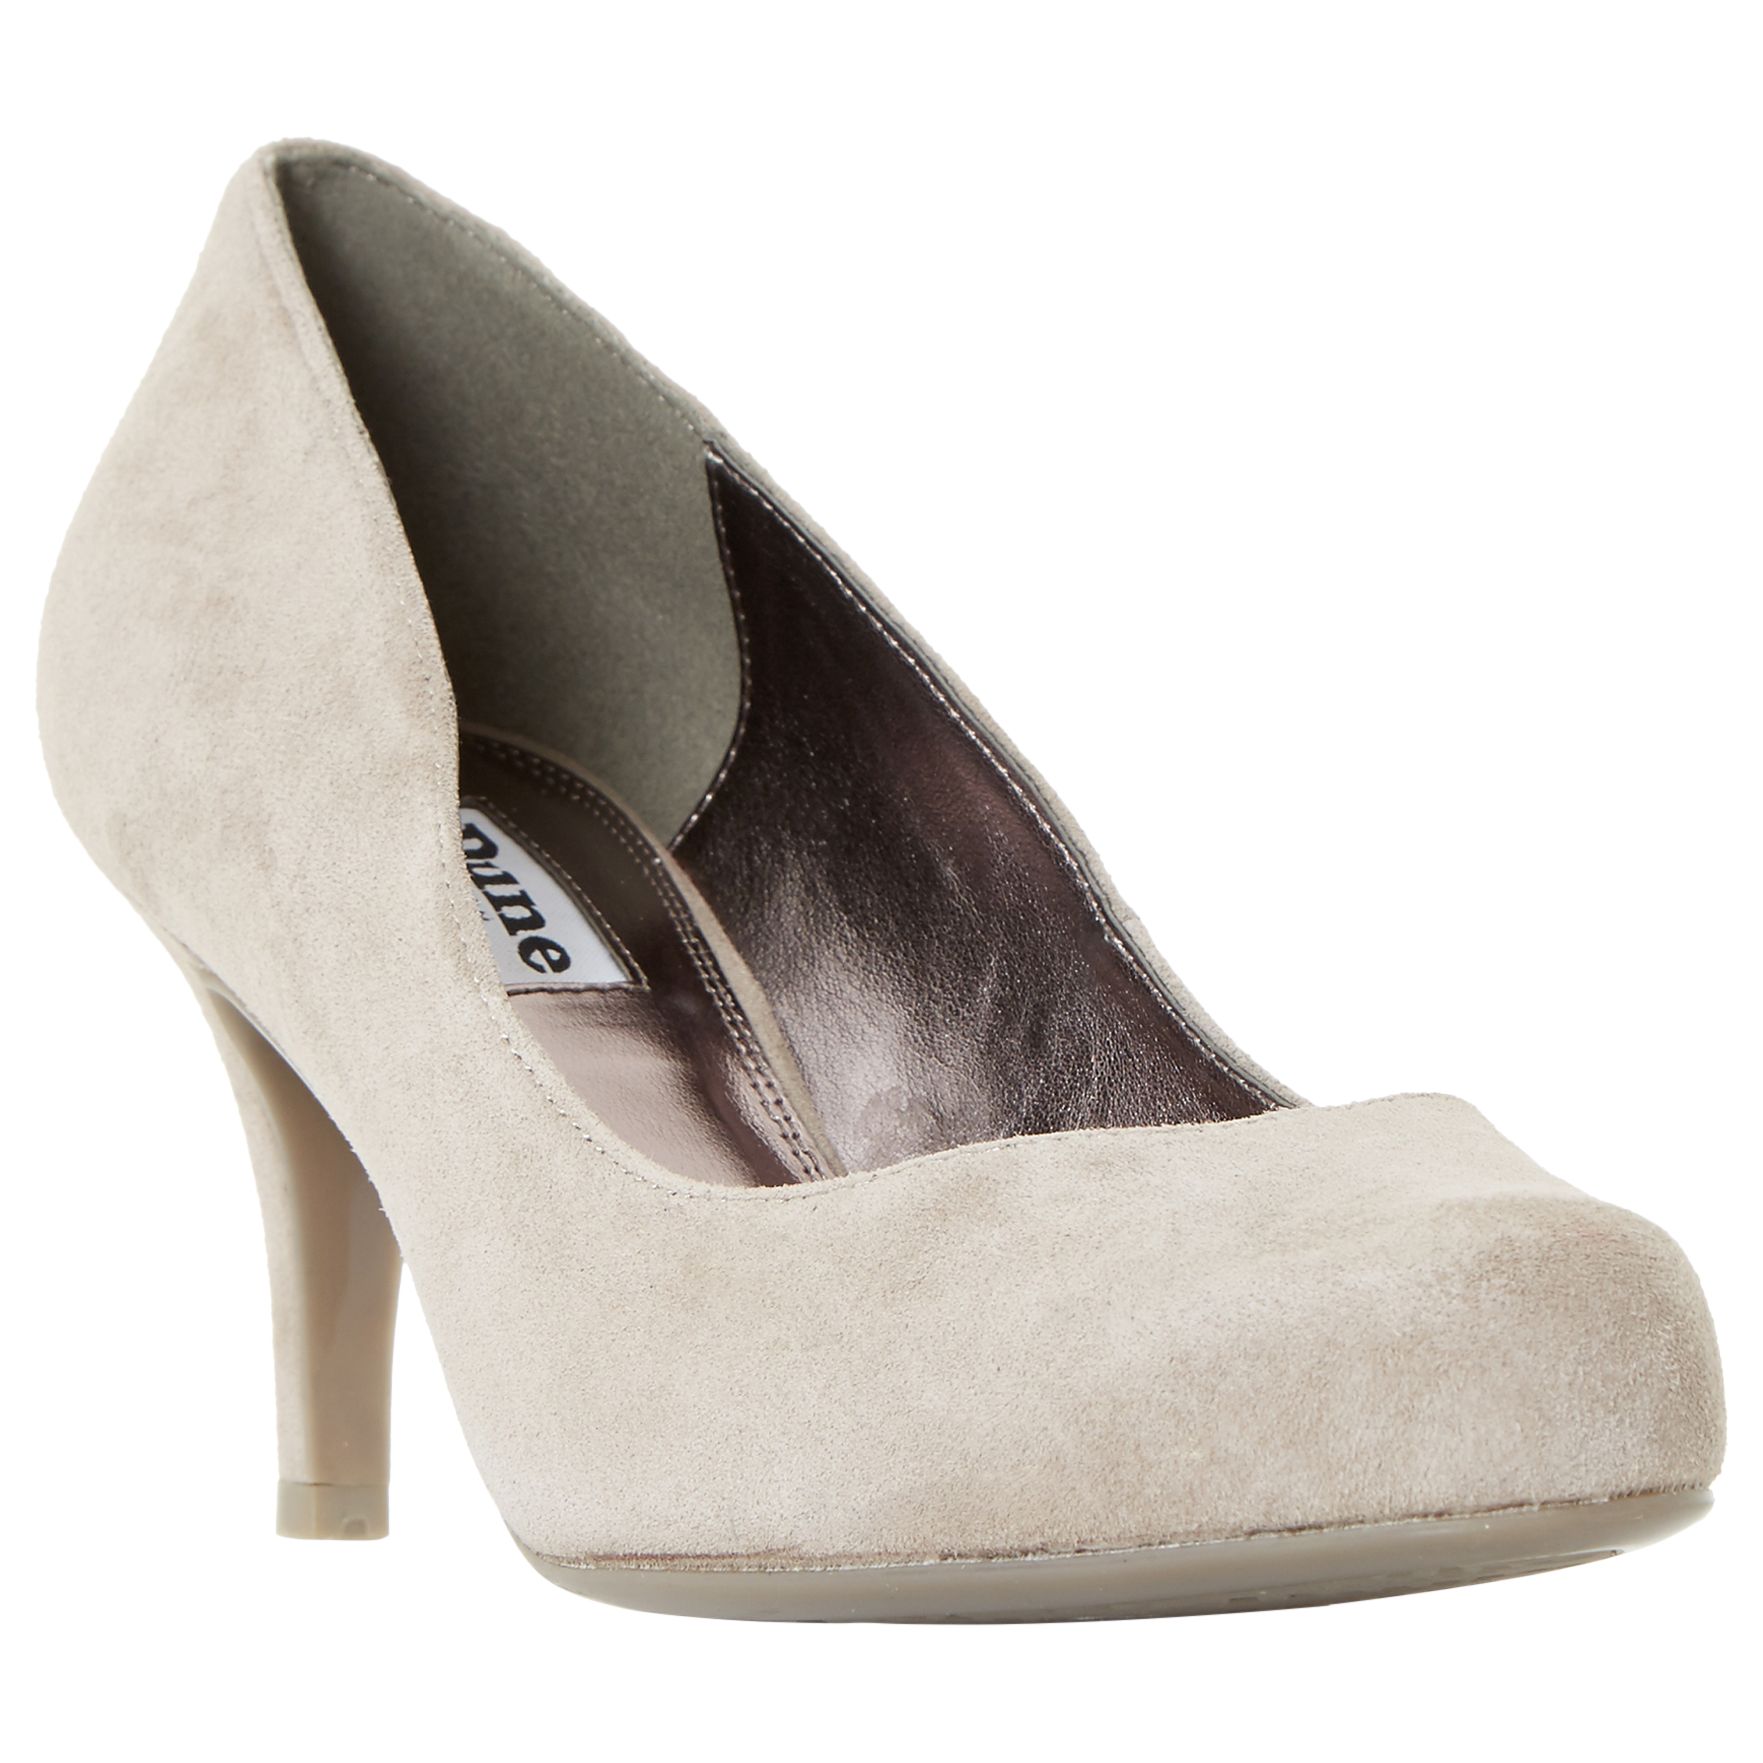 Dune Amelia Stiletto Heeled Court Shoes, Taupe Suede, 7